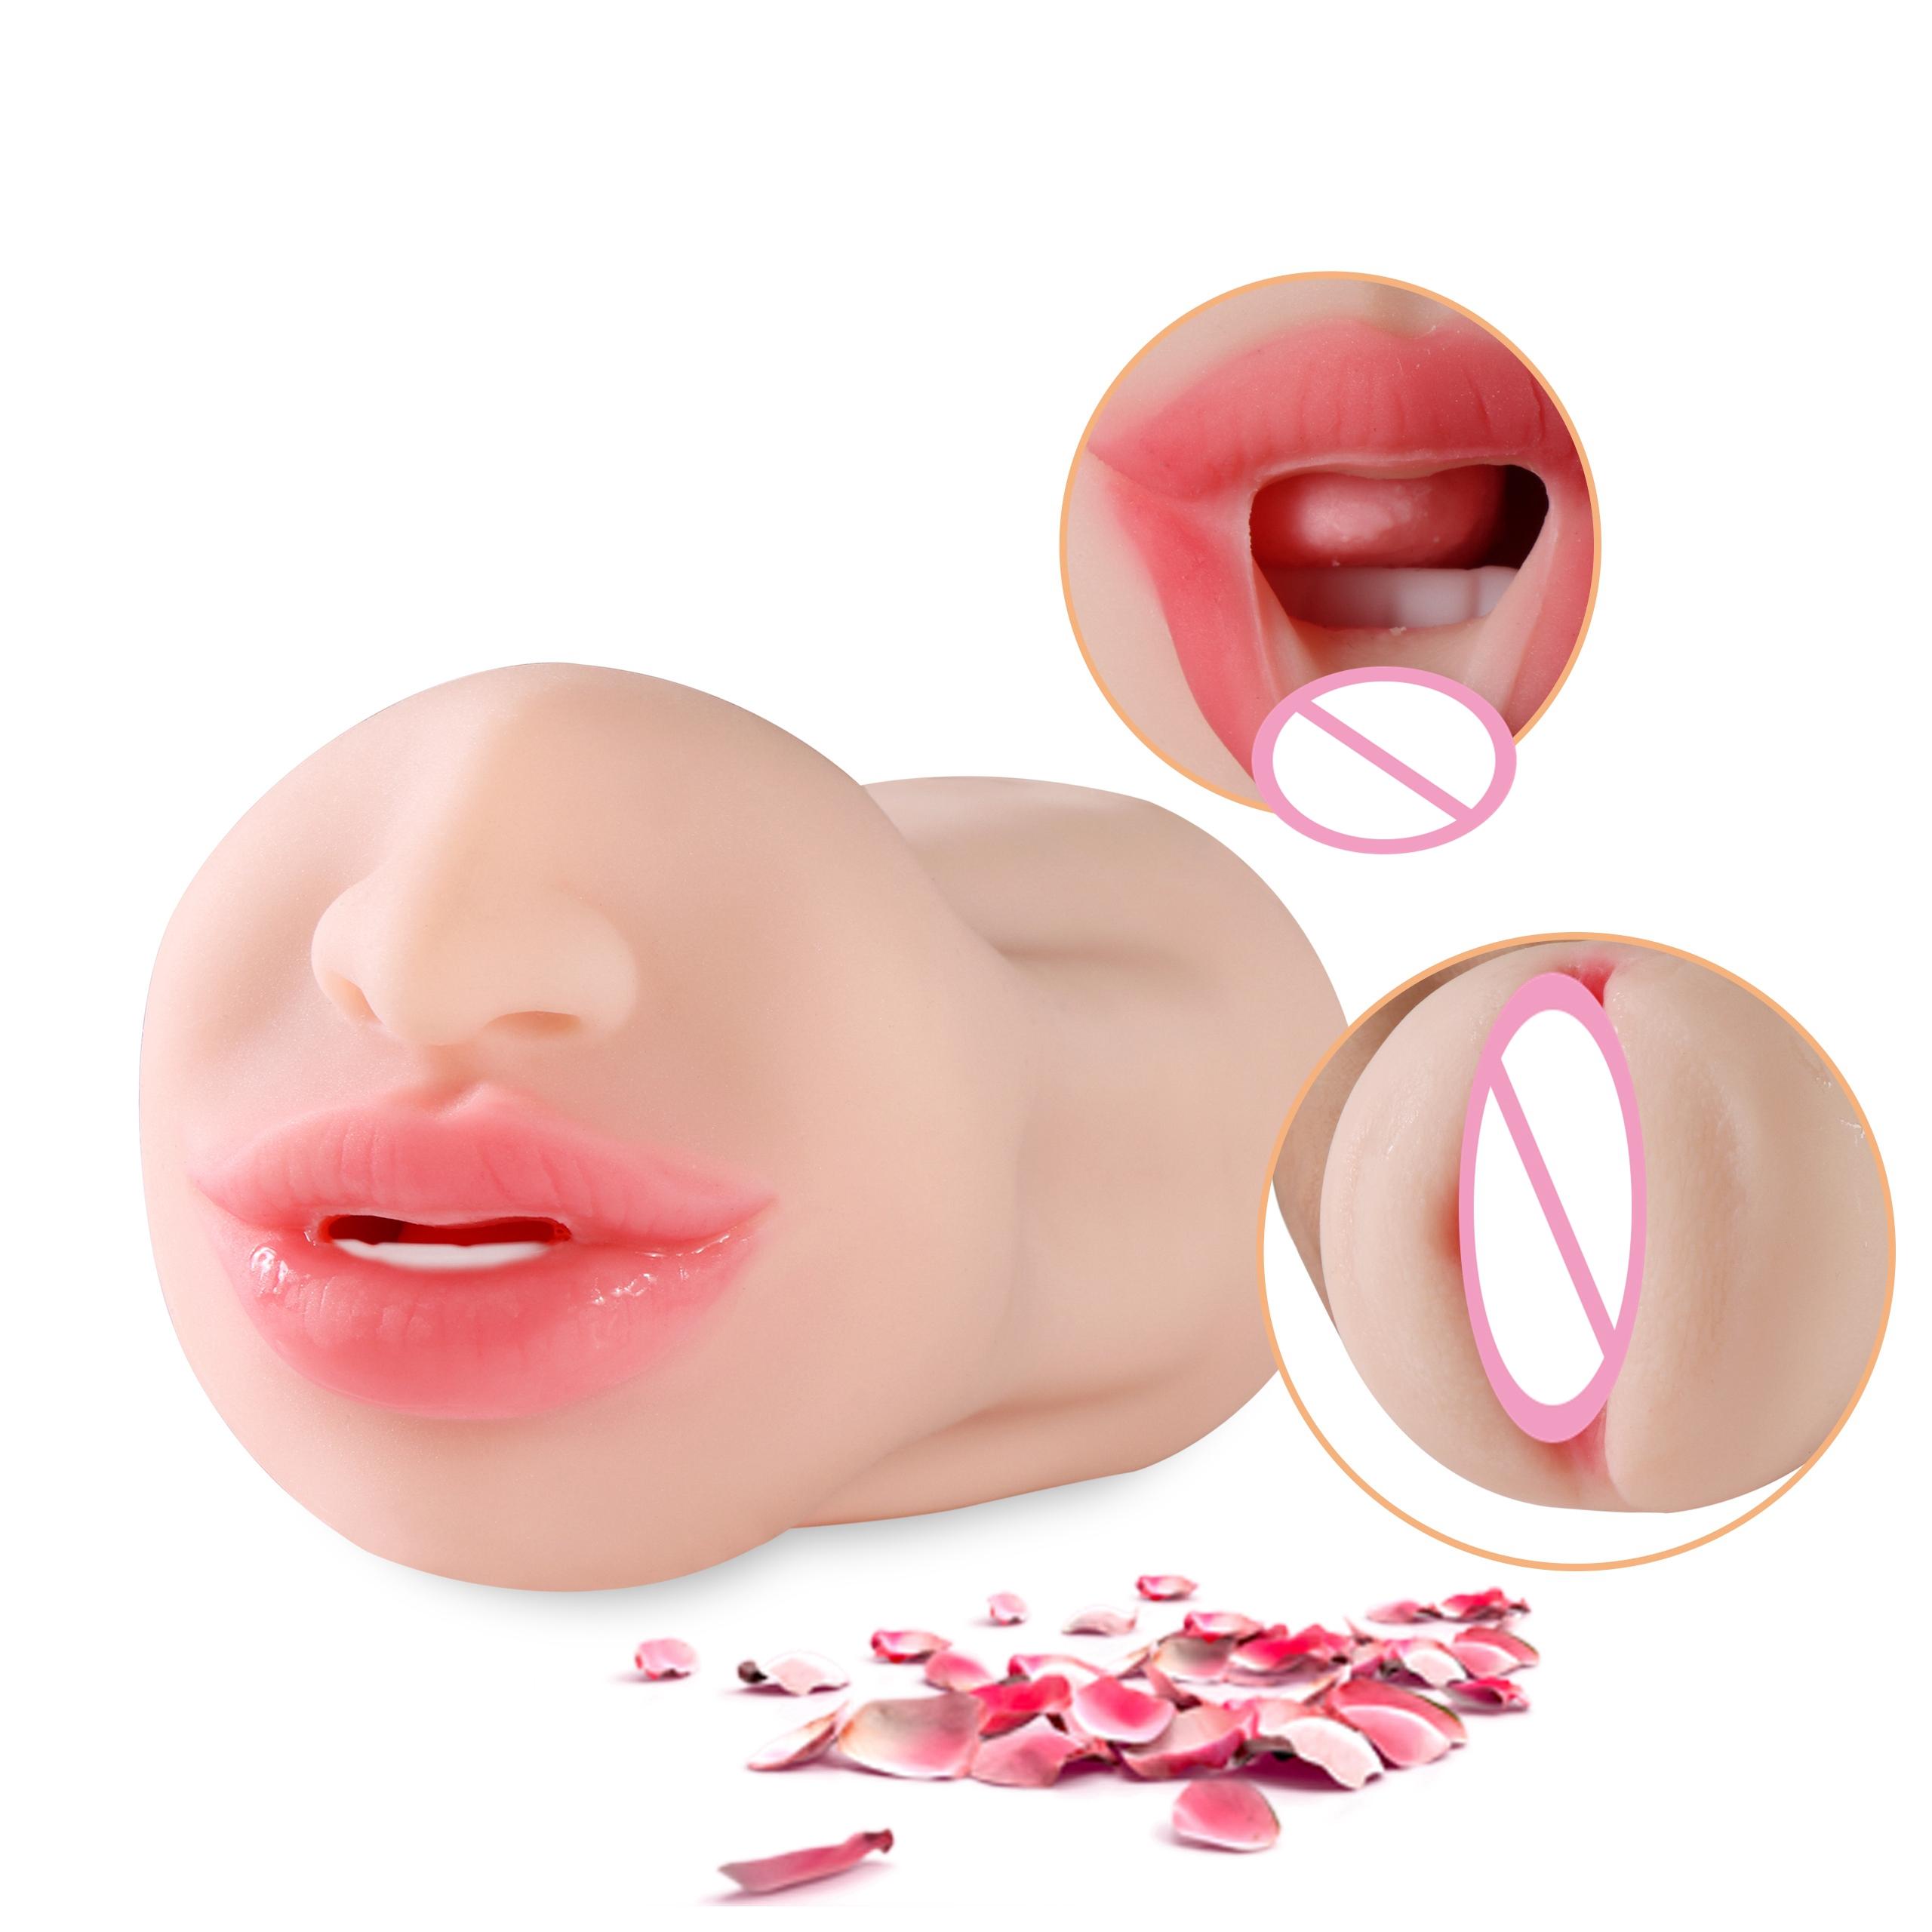  Real Soft Sex Doll With Realistic Textured Tight Anus Masturbator And Mouth Vagina Deep Throat Oral Adult Sex Toys For Men